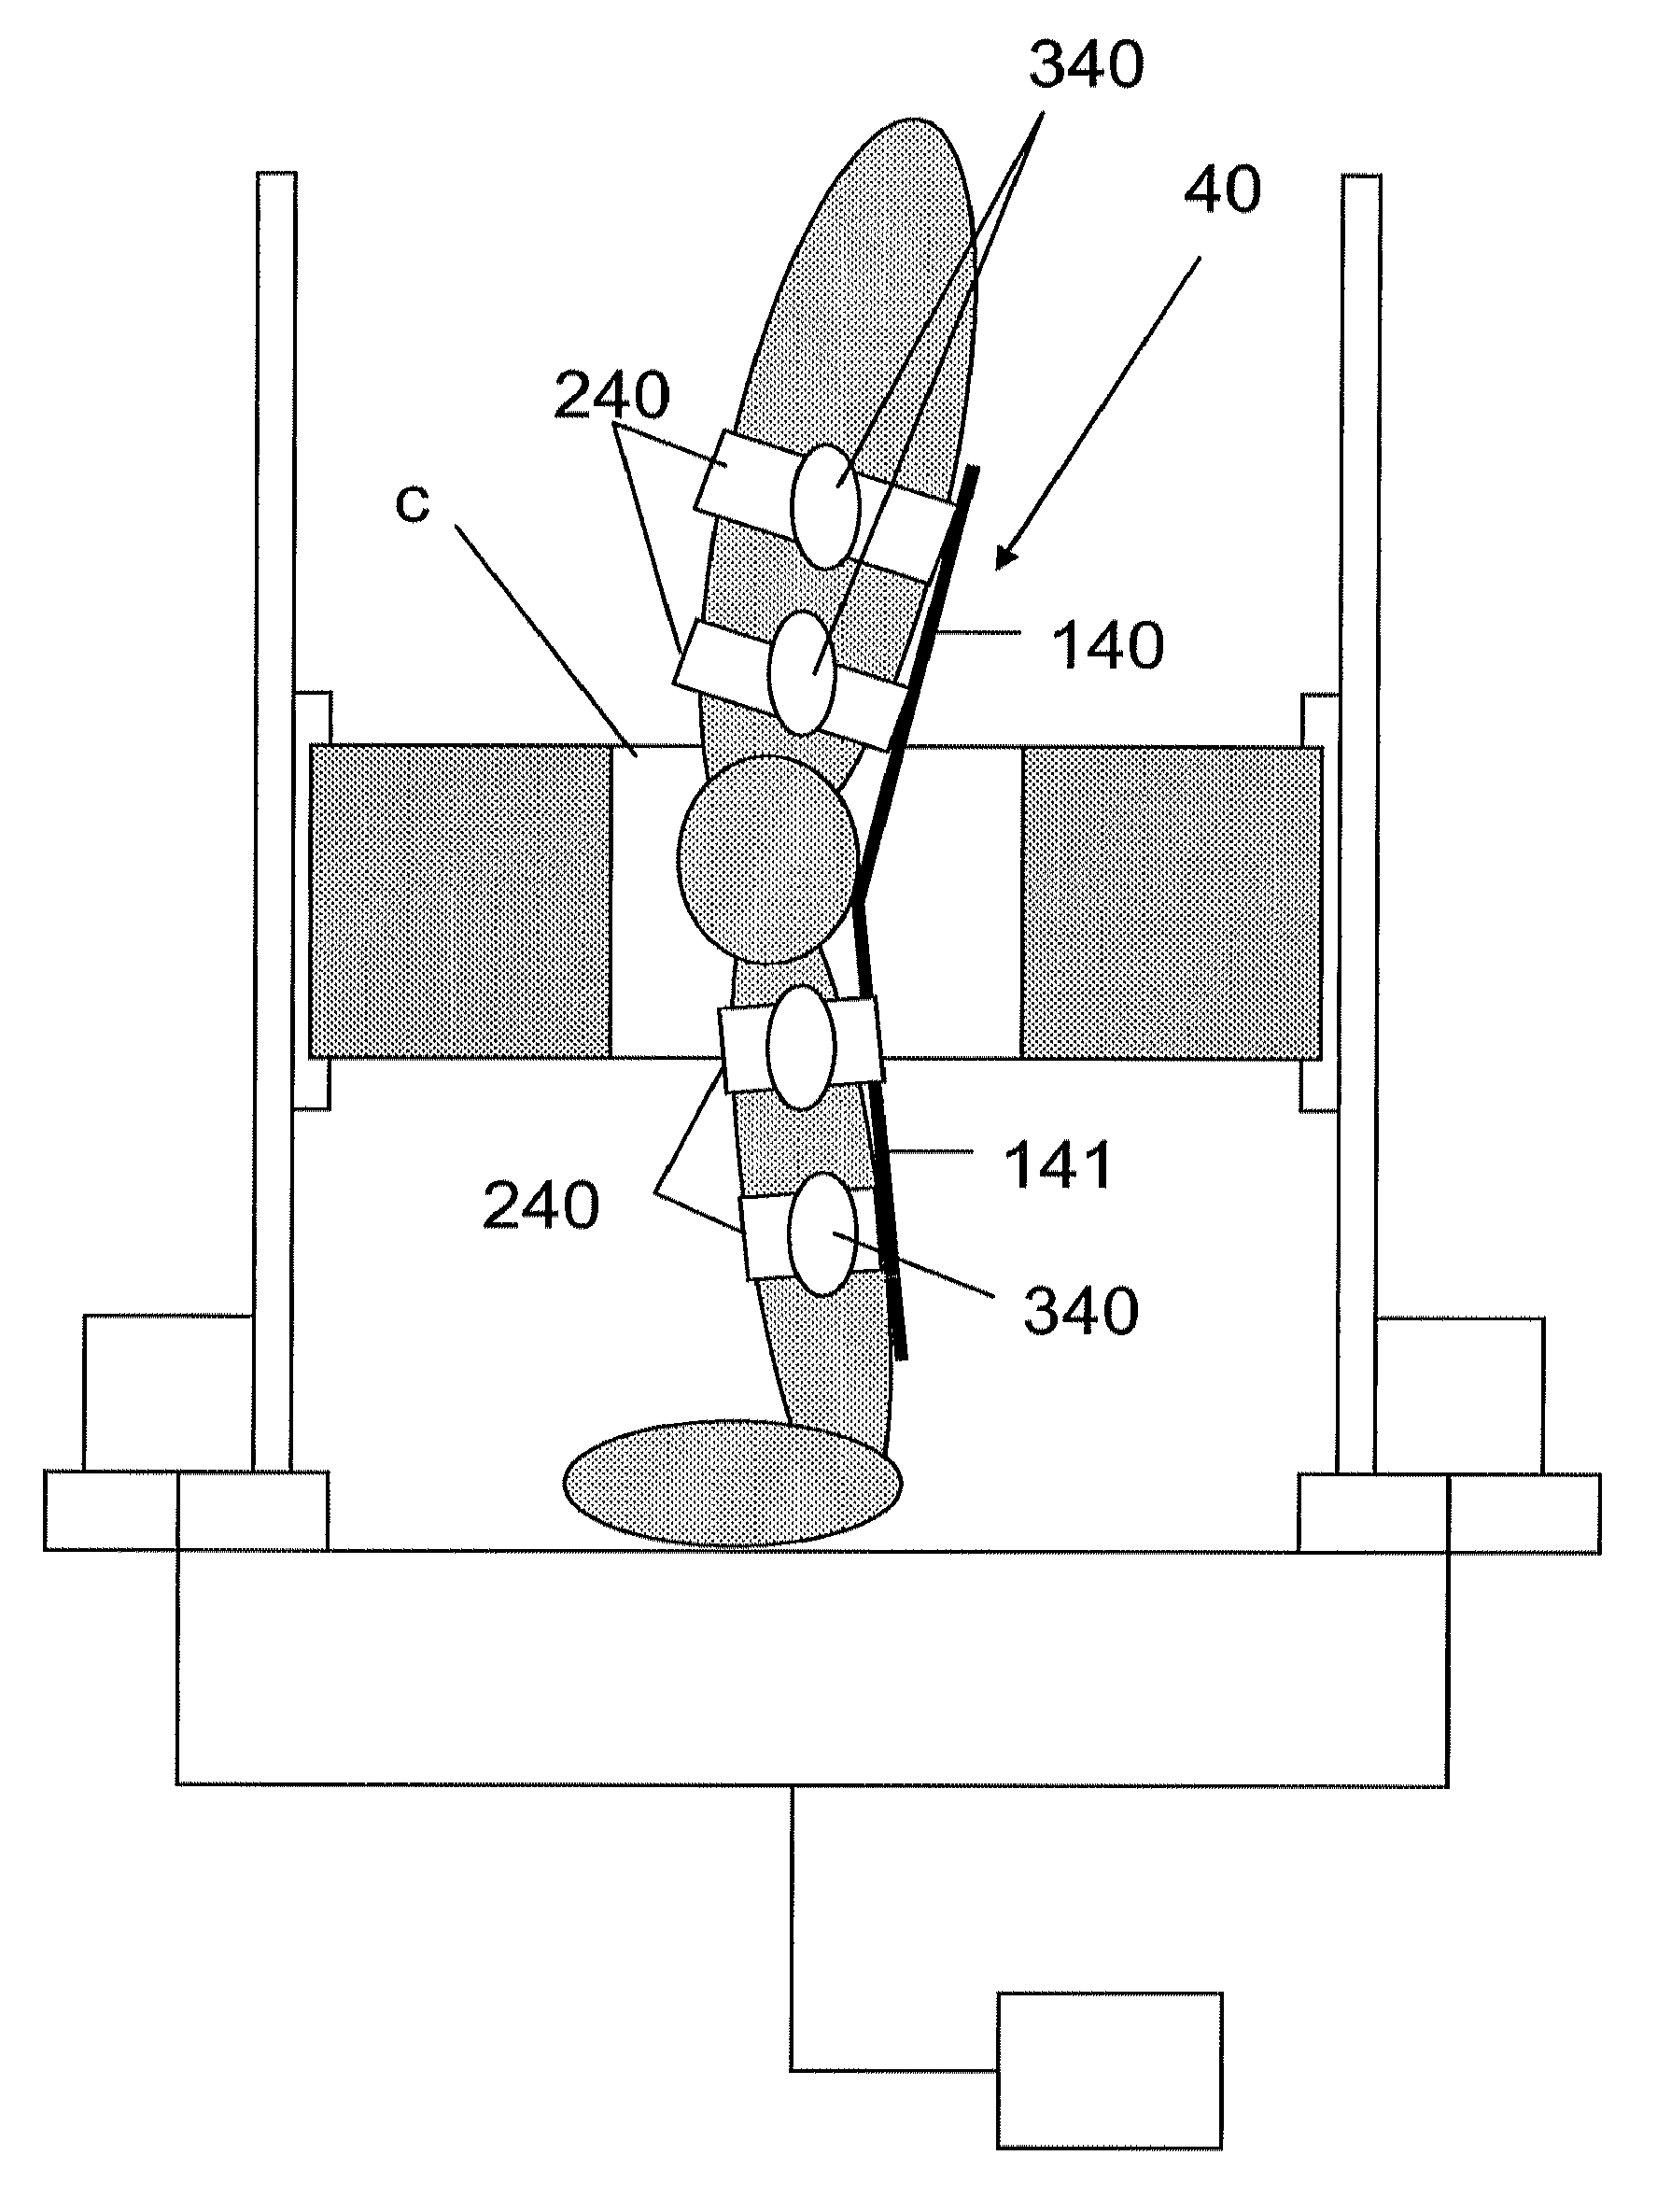 Apparatus for magnetic resonance imaging of patients with limbs, particularly lower limbs, under natural stress